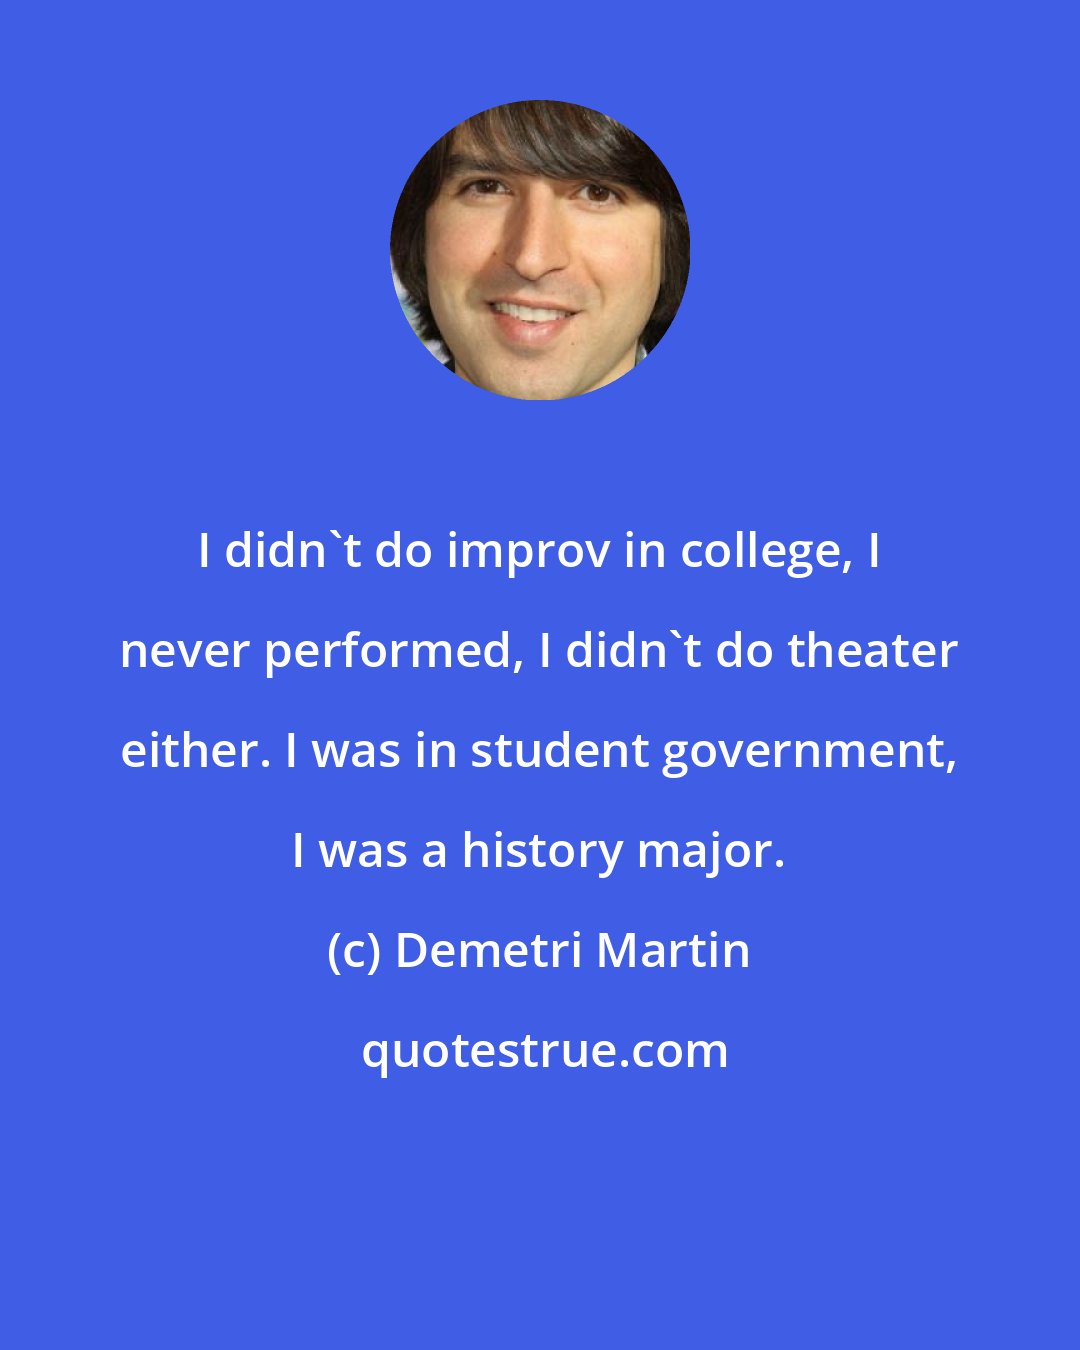 Demetri Martin: I didn't do improv in college, I never performed, I didn't do theater either. I was in student government, I was a history major.